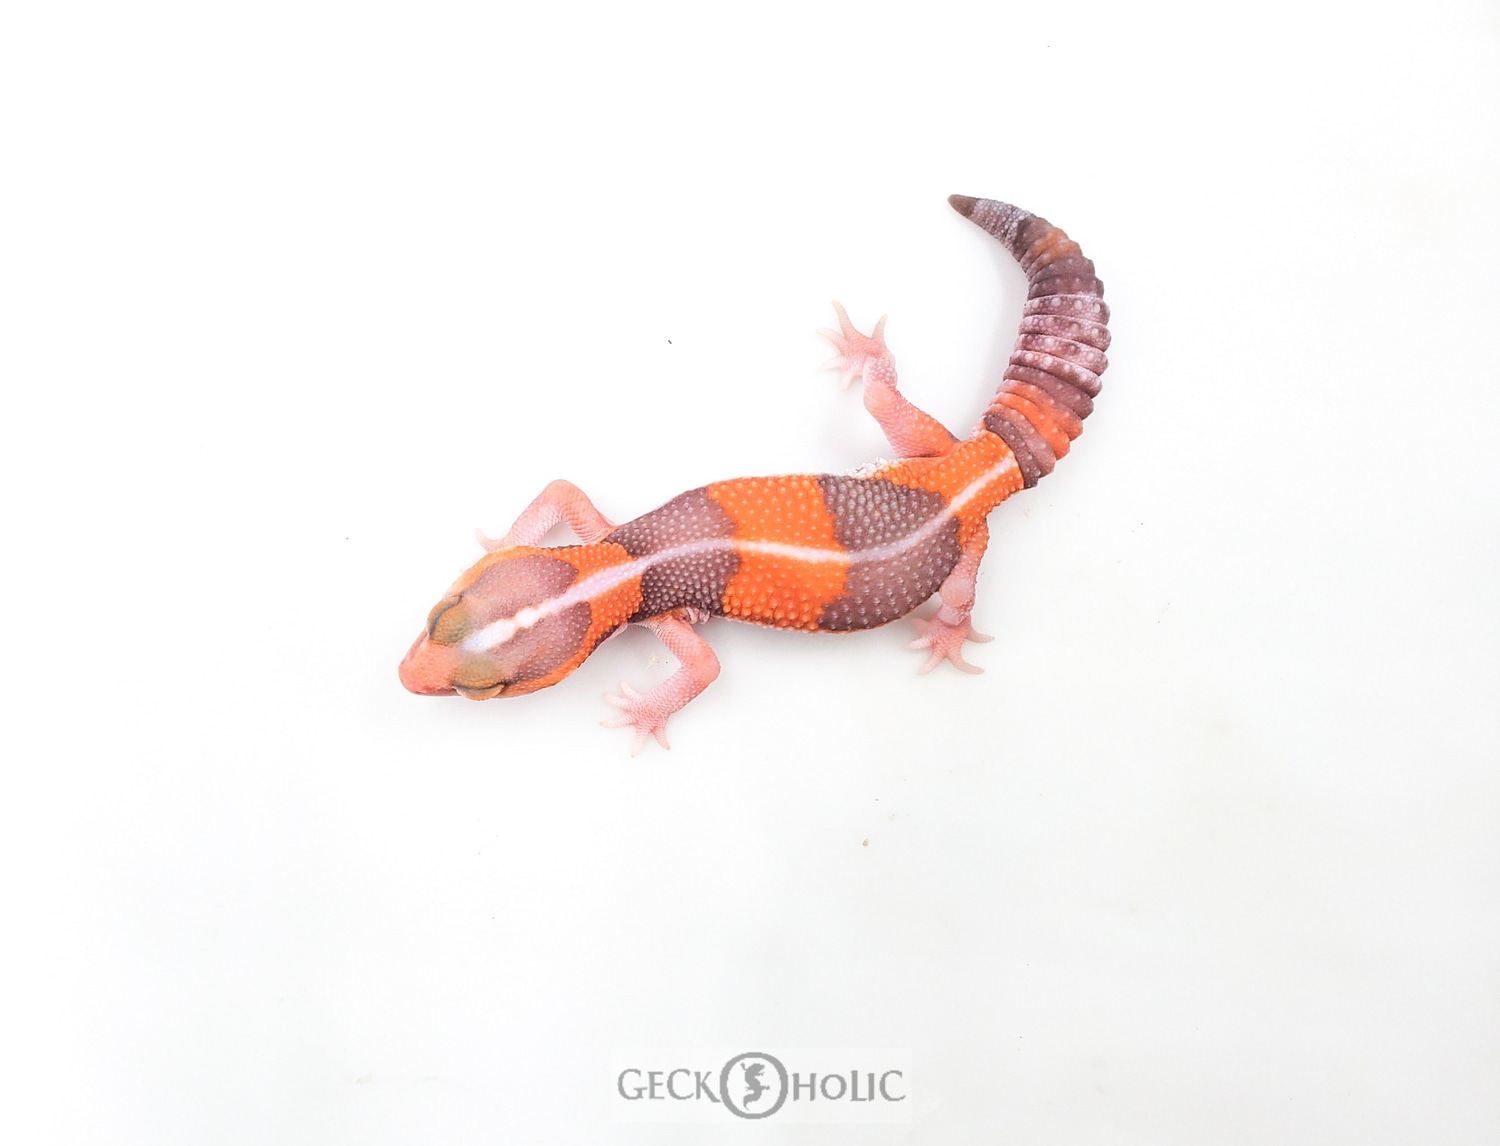 Striped Tangerine Amelanistic 50% Het Patternless African Fat-Tailed Gecko by Geckoholic